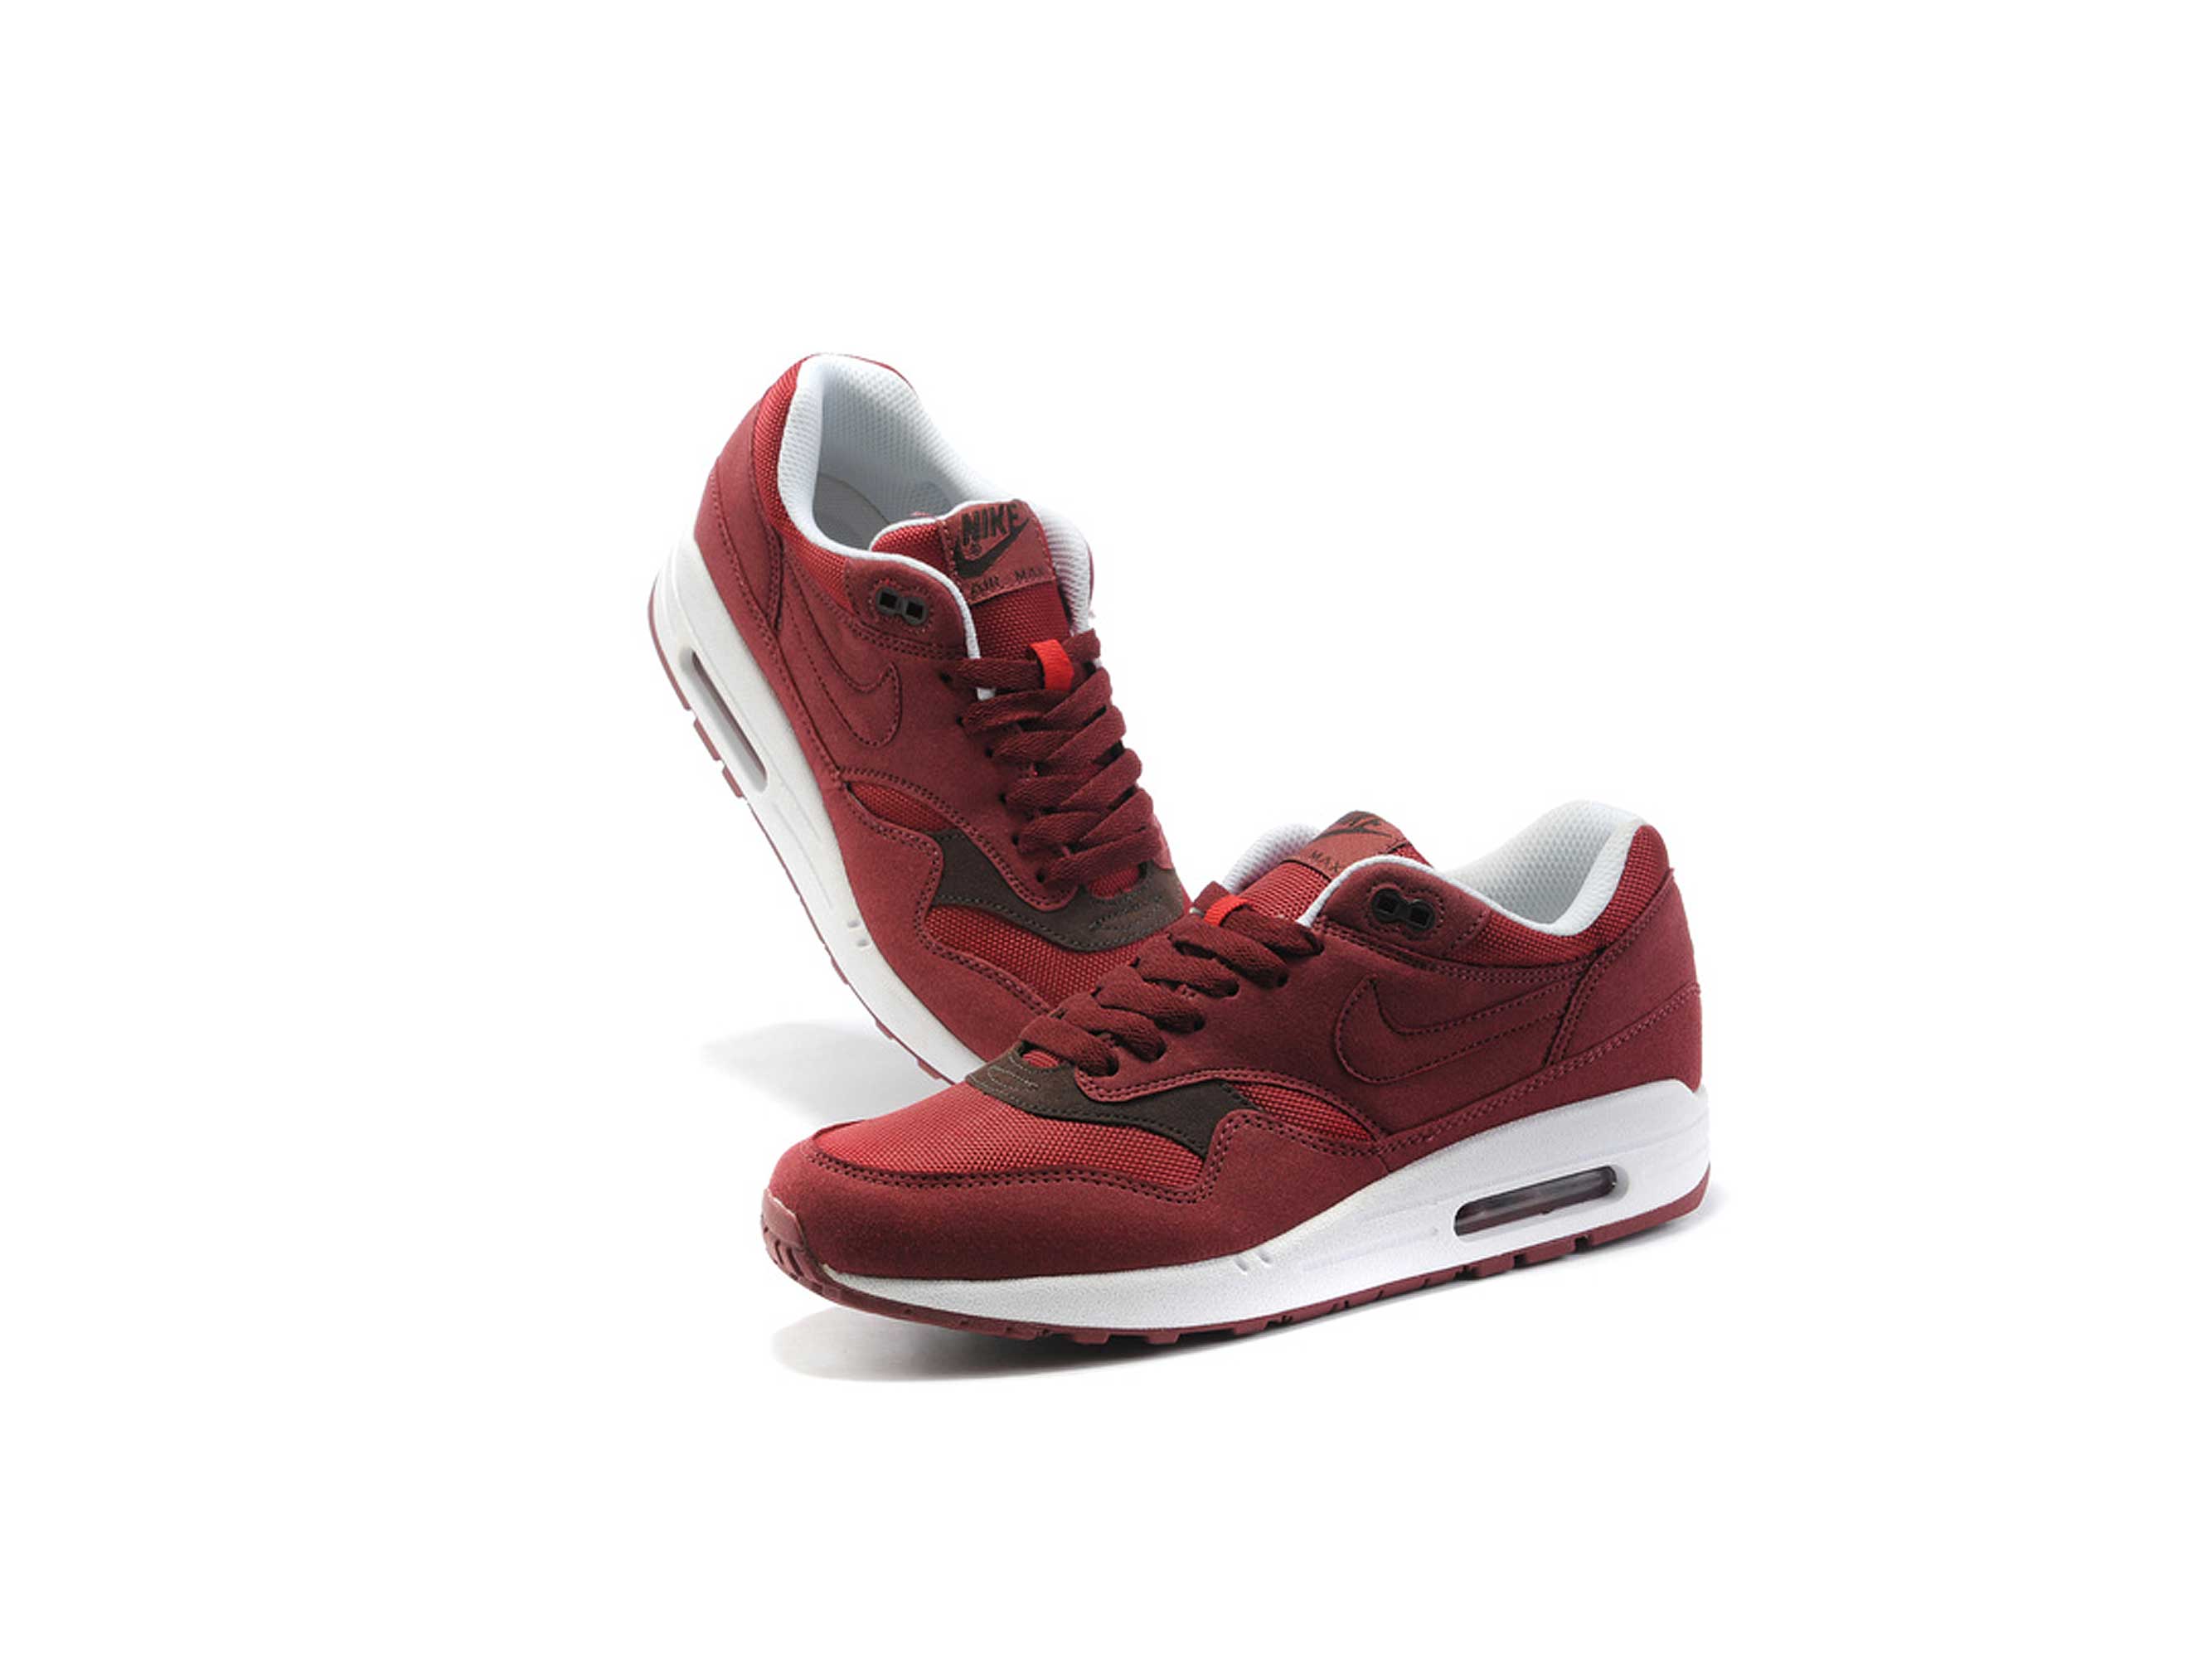 Бордовые найки. Nike Air Max 1 Red. Nike Air Max 87. Nike Air Max 90 бордовые. Air Max 87 Red.